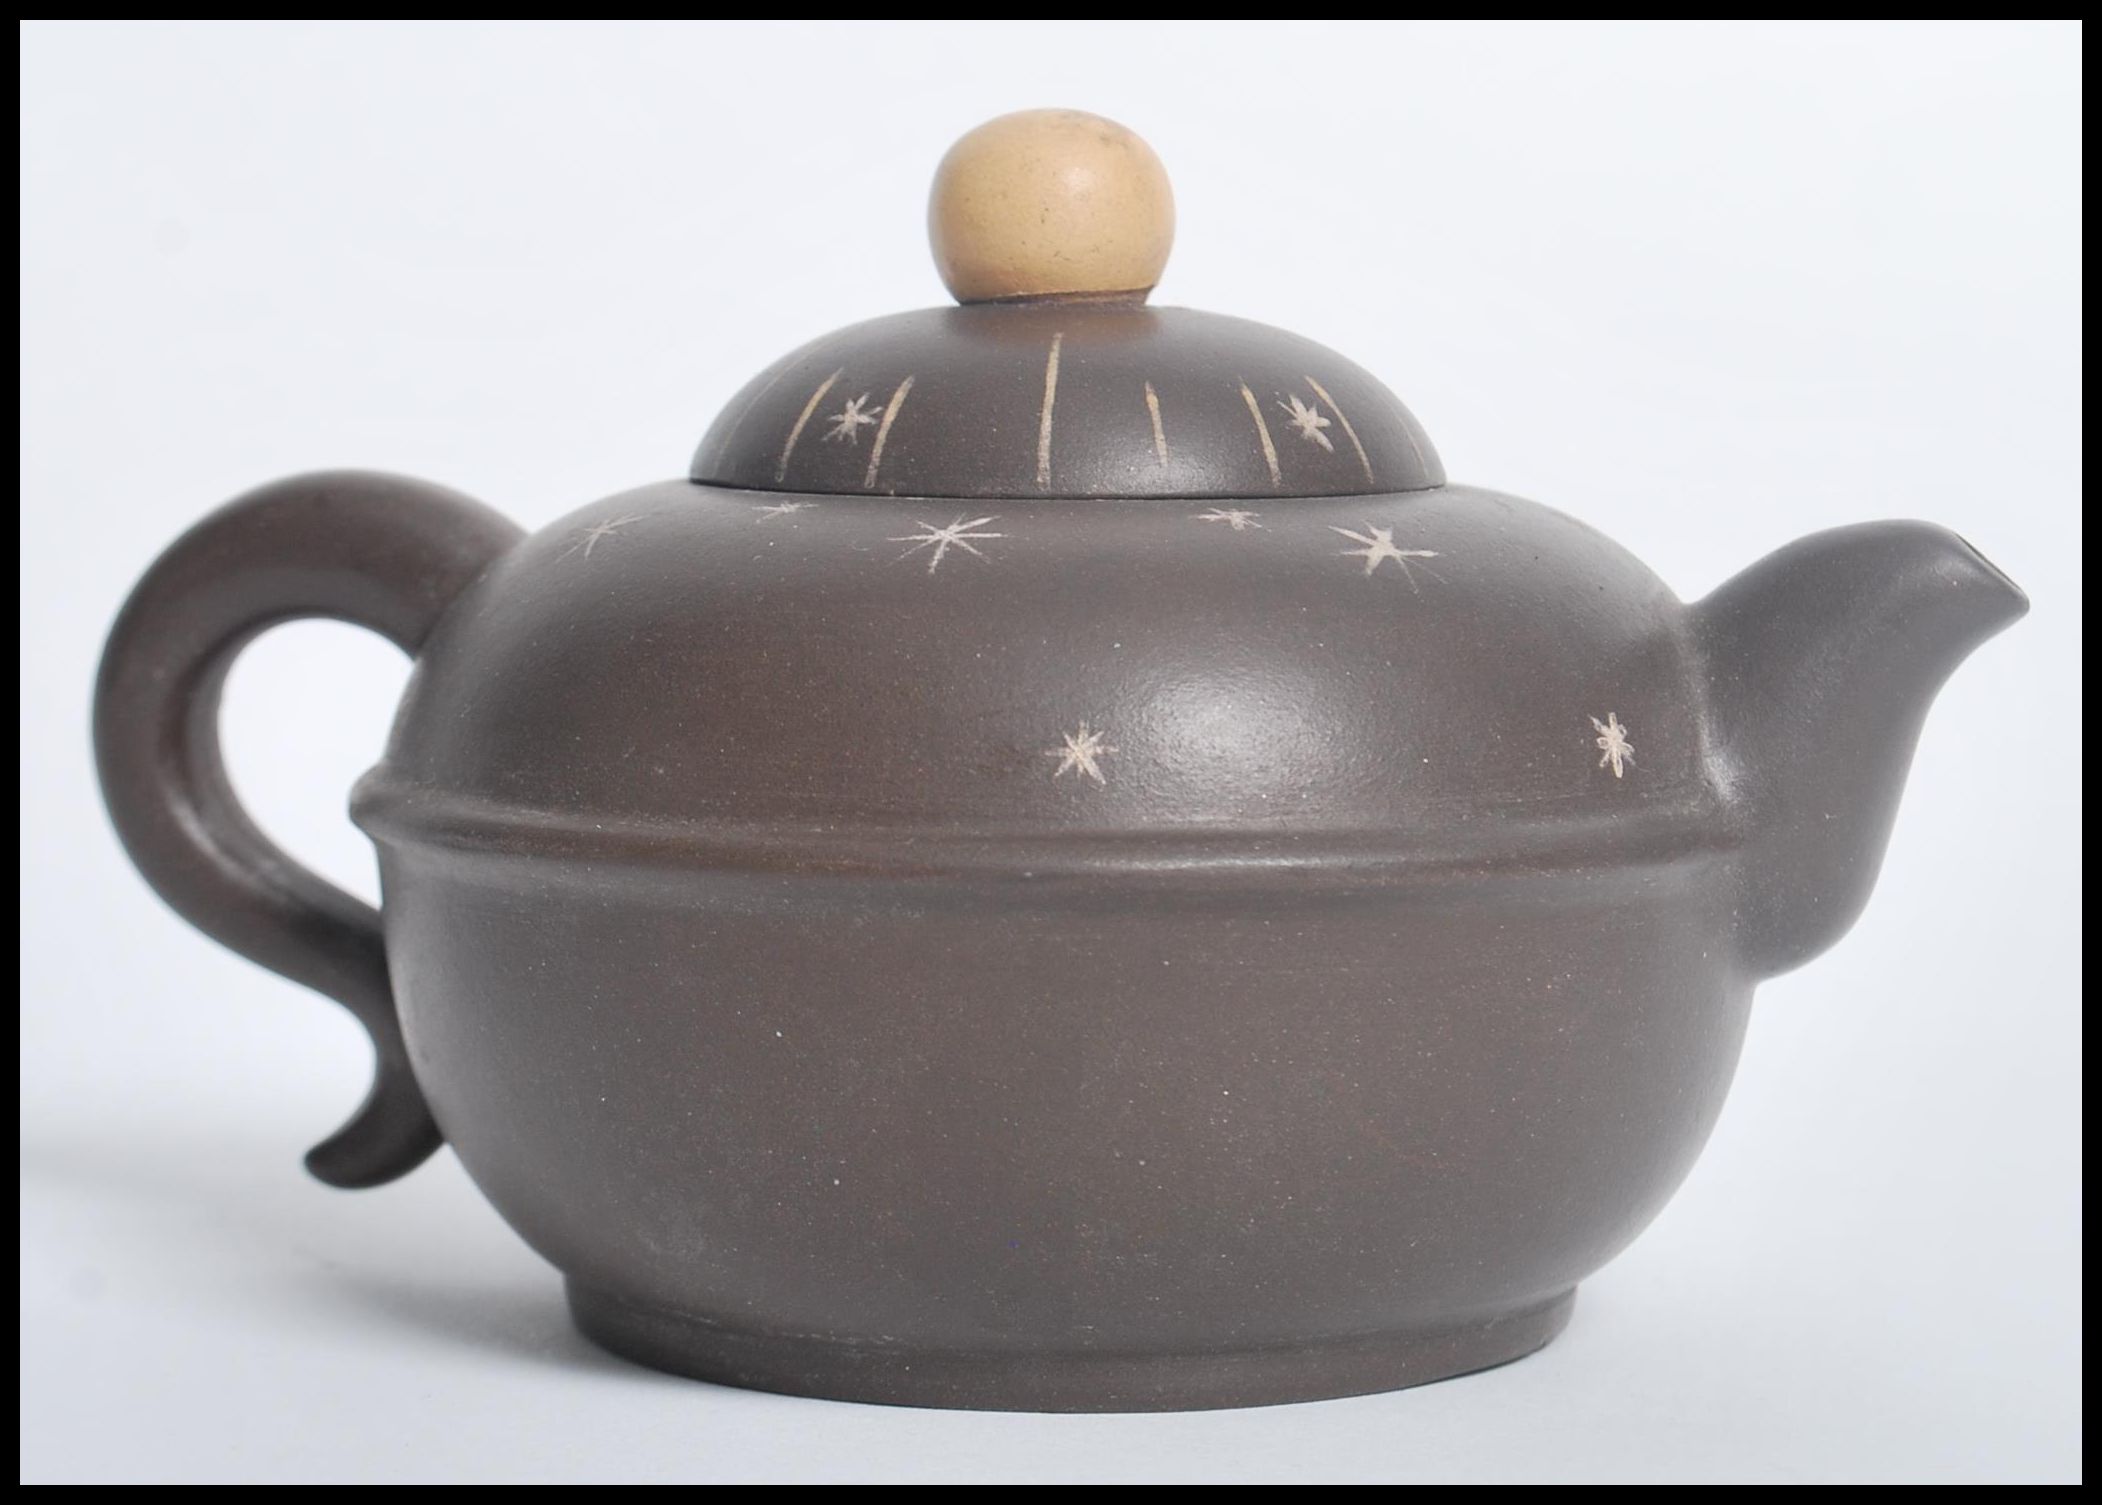 A Chinese Yi Zing terracotta teapot having a ball finial lid with star decoration and character